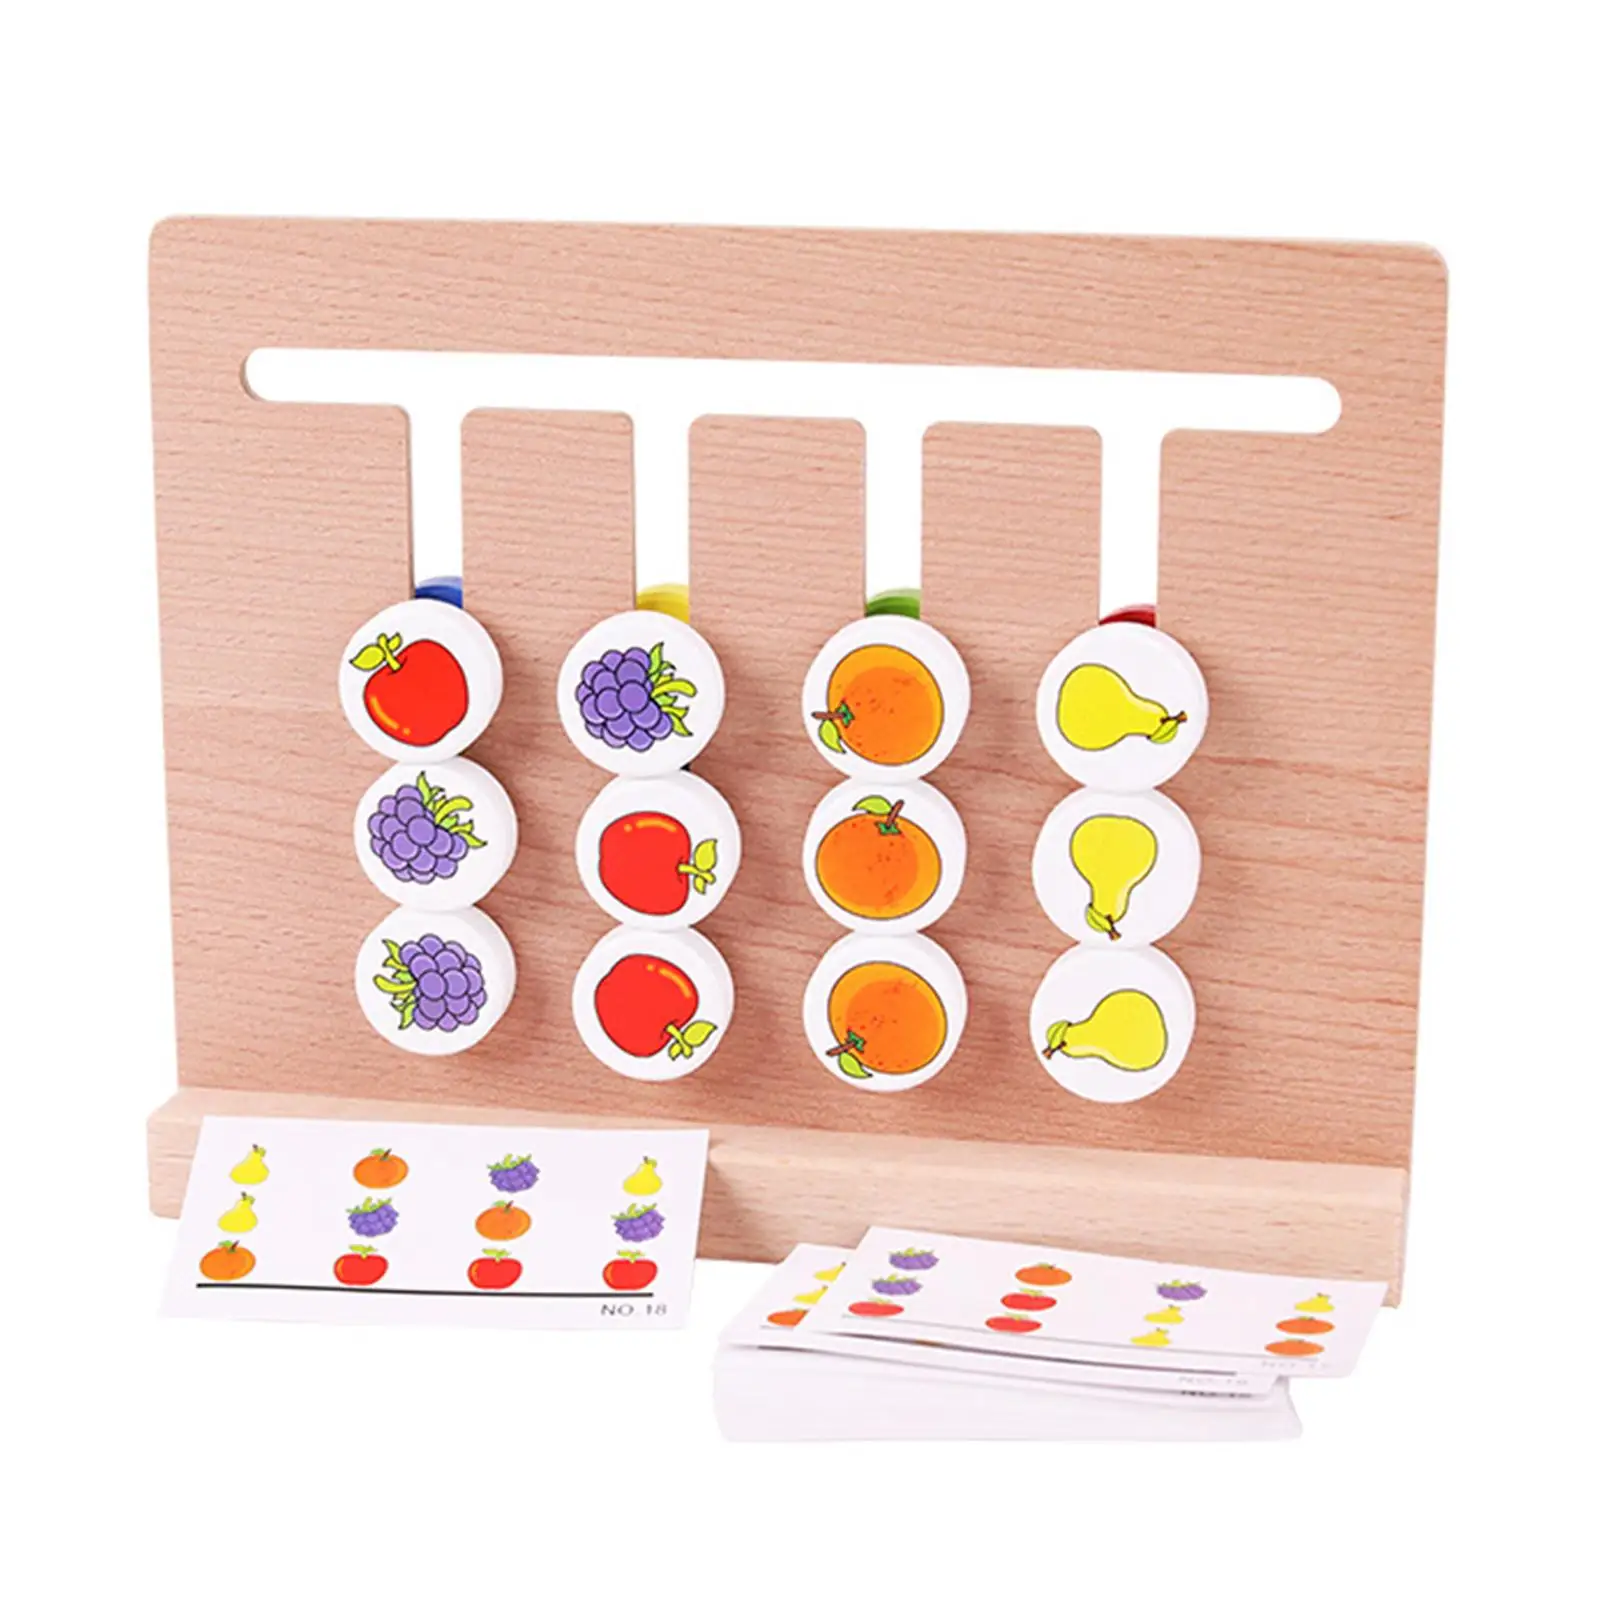 Early Childhood Education Matching Logical Game Teaching Aids Multipurpose Gifts Color Sort Board for Family Party Toddlers